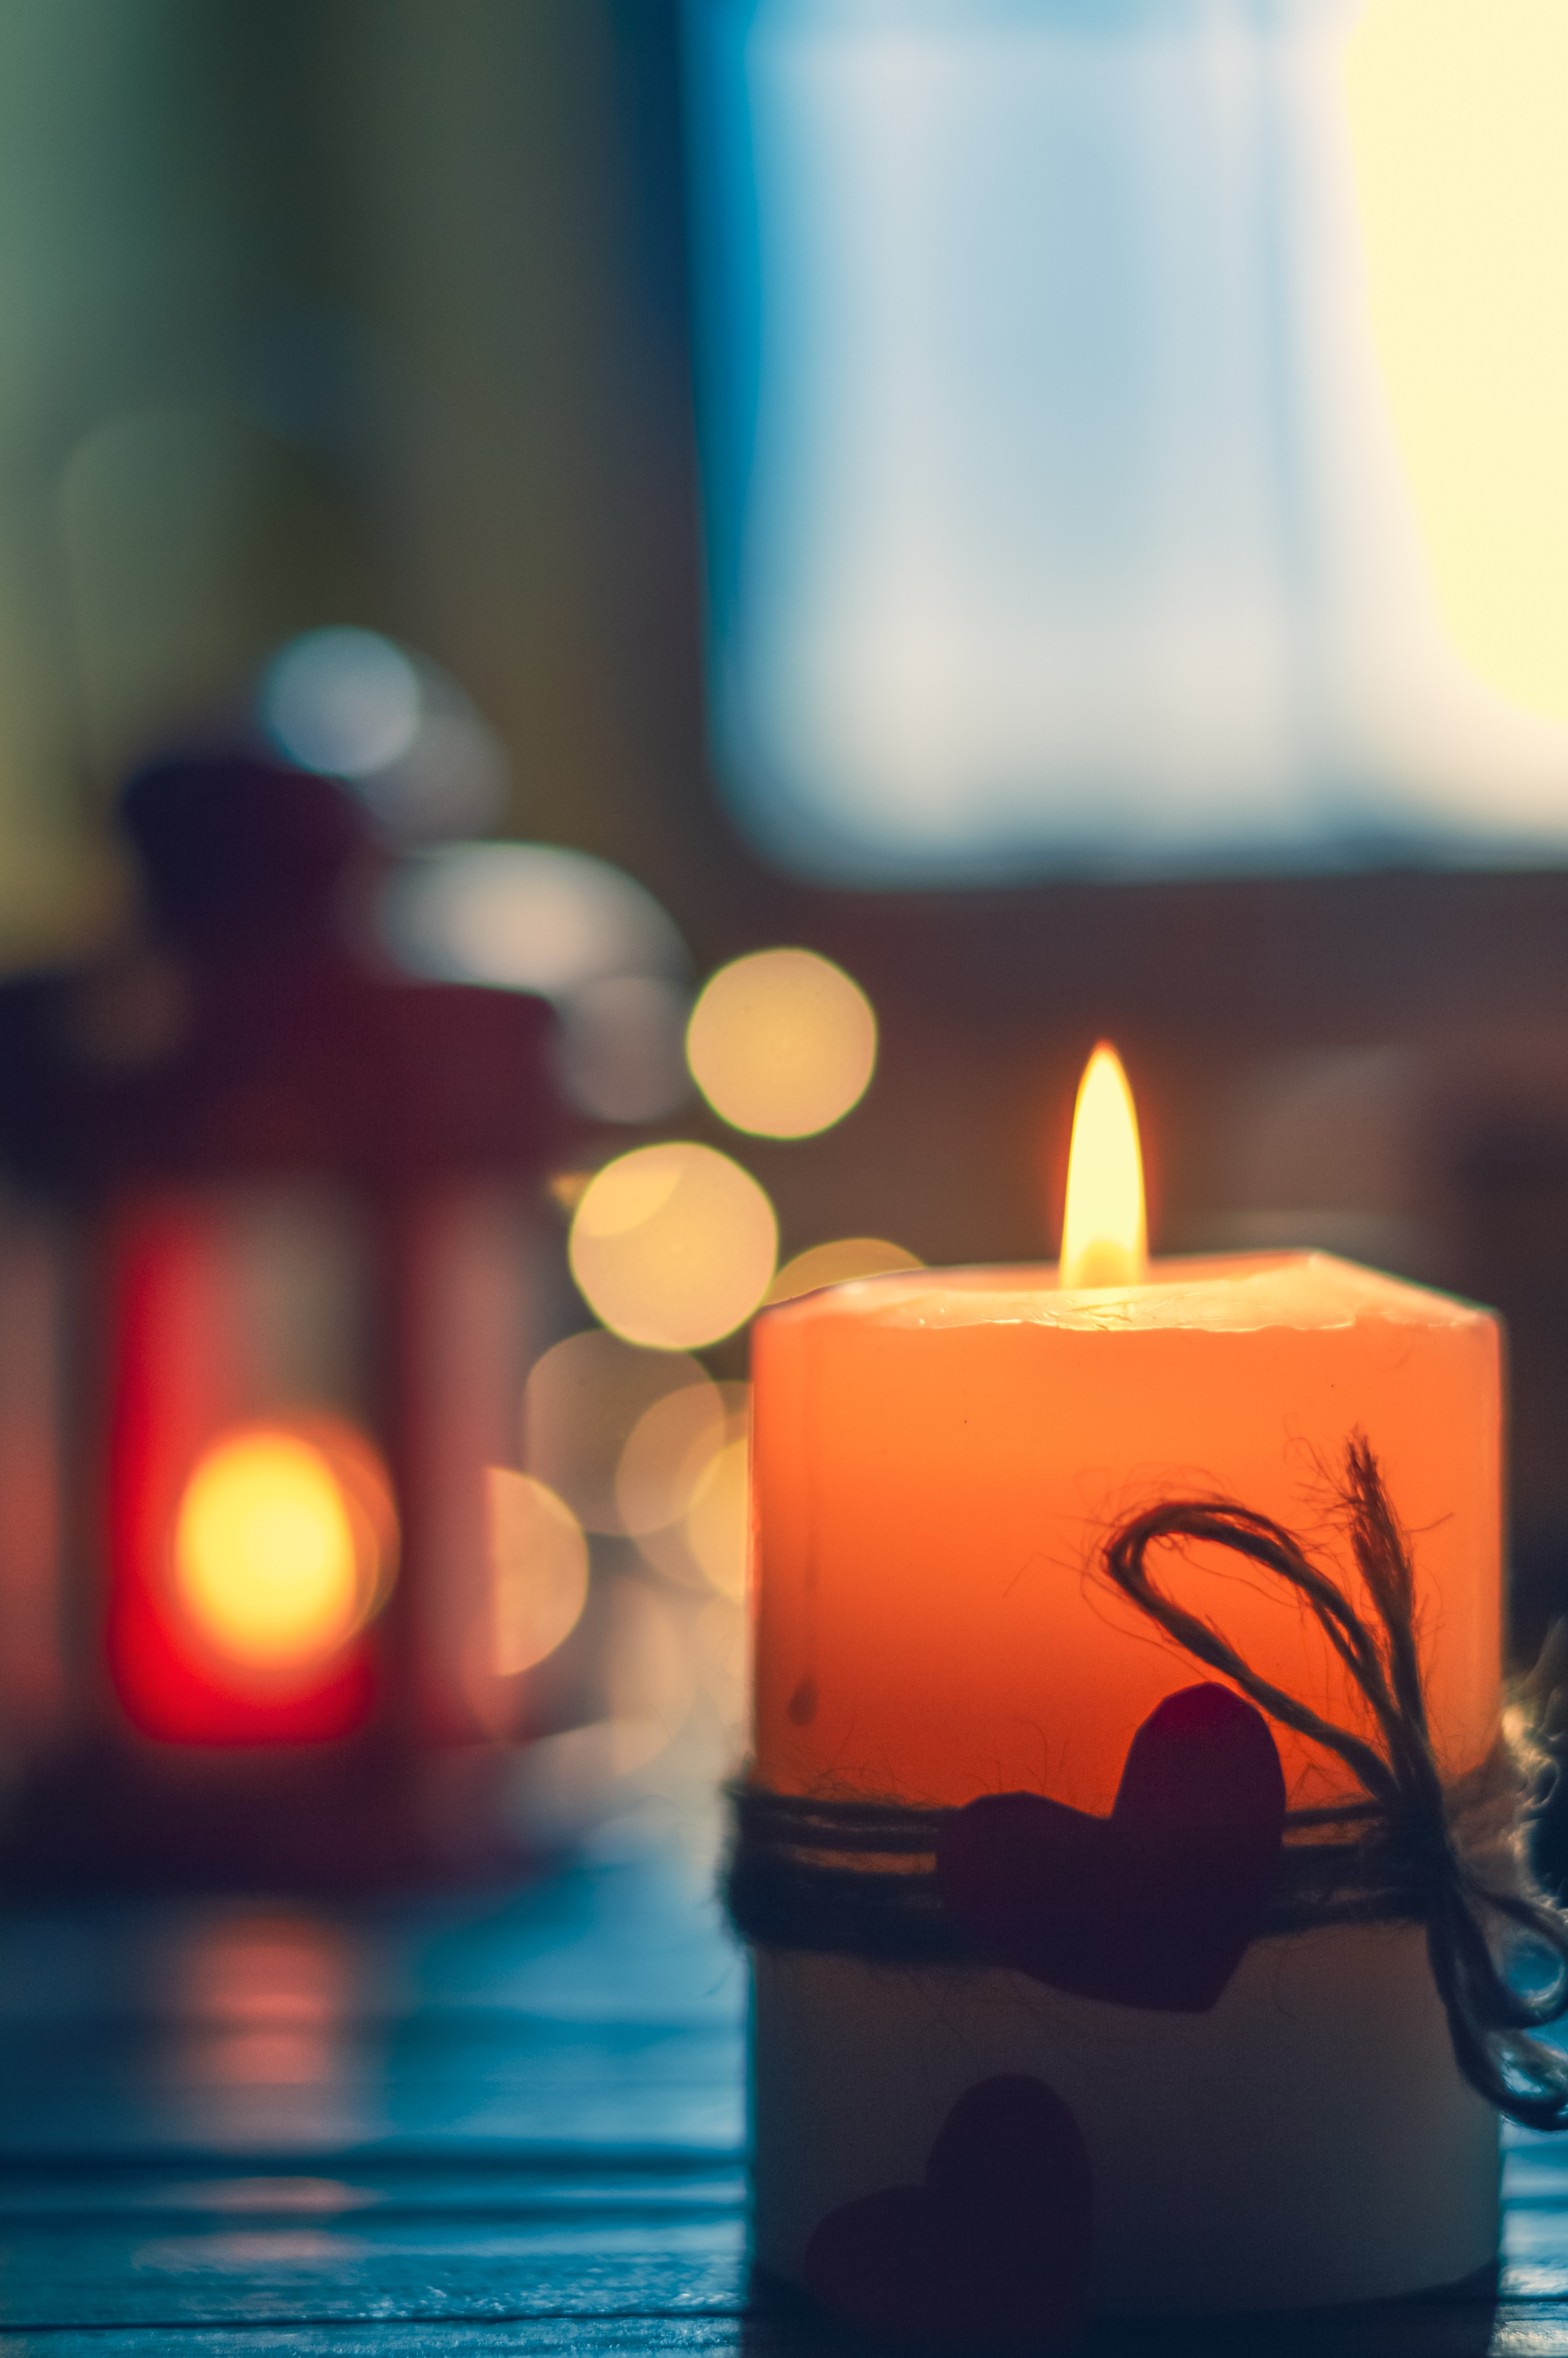 UHD wallpaper fire, heart, miscellaneous, candle